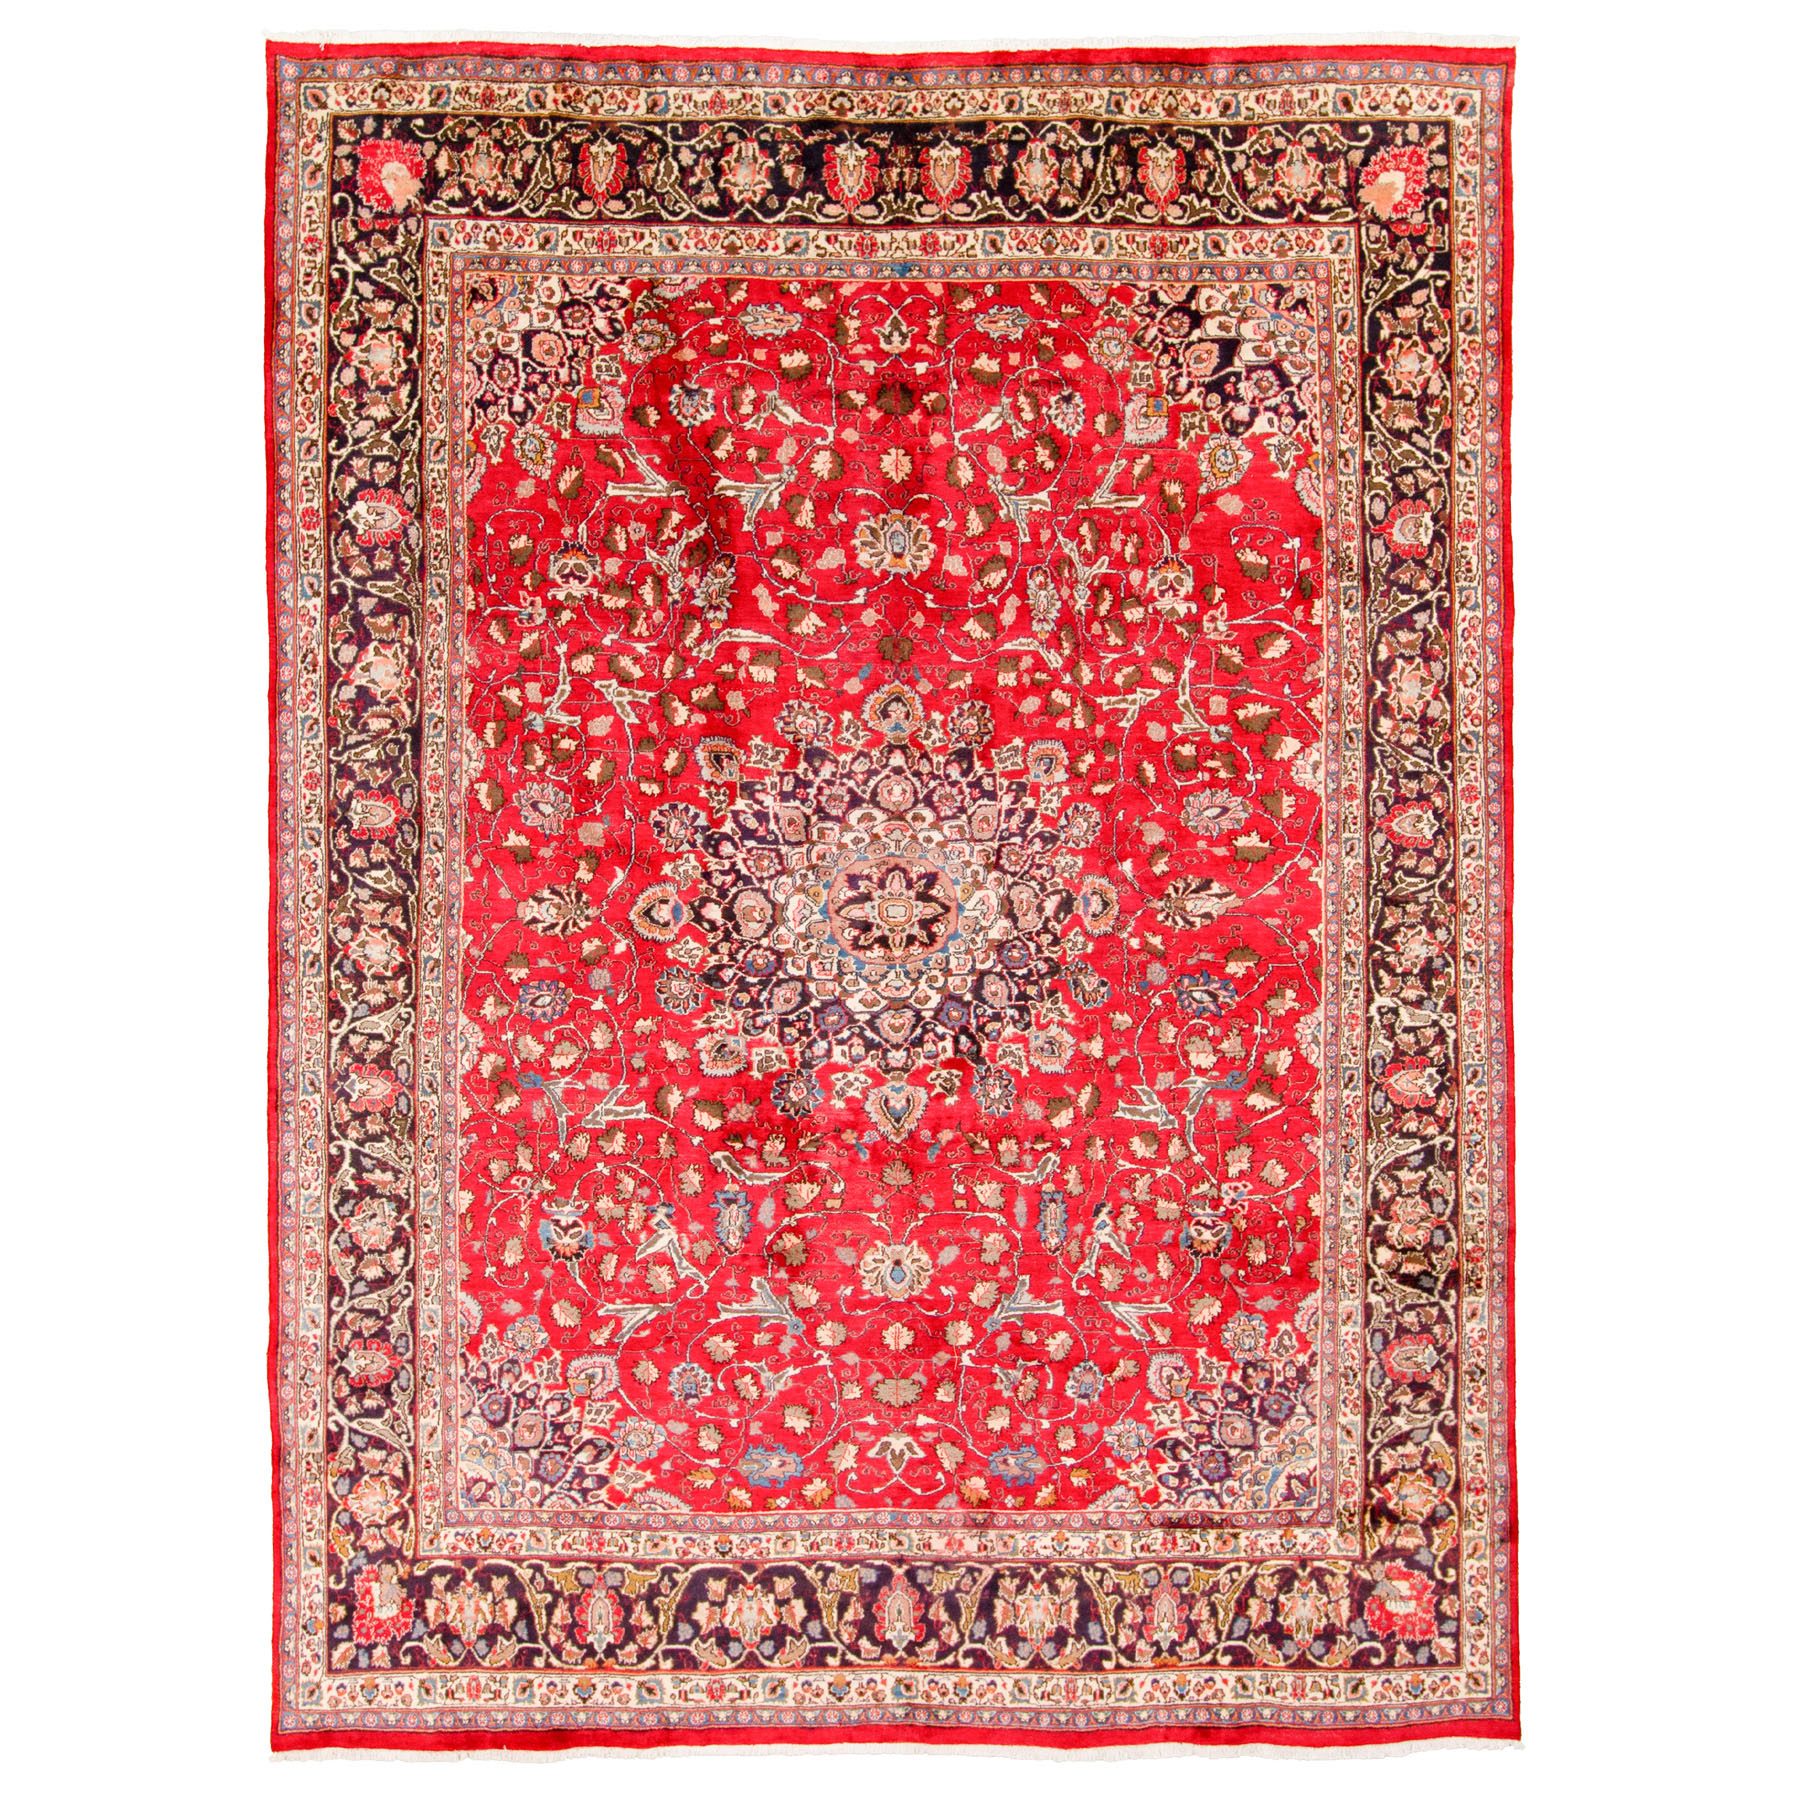 9'6"X12'3" Red Semi Antique Persian Kashan Pure Wool Hand Knotted Oriental Rug moad7878